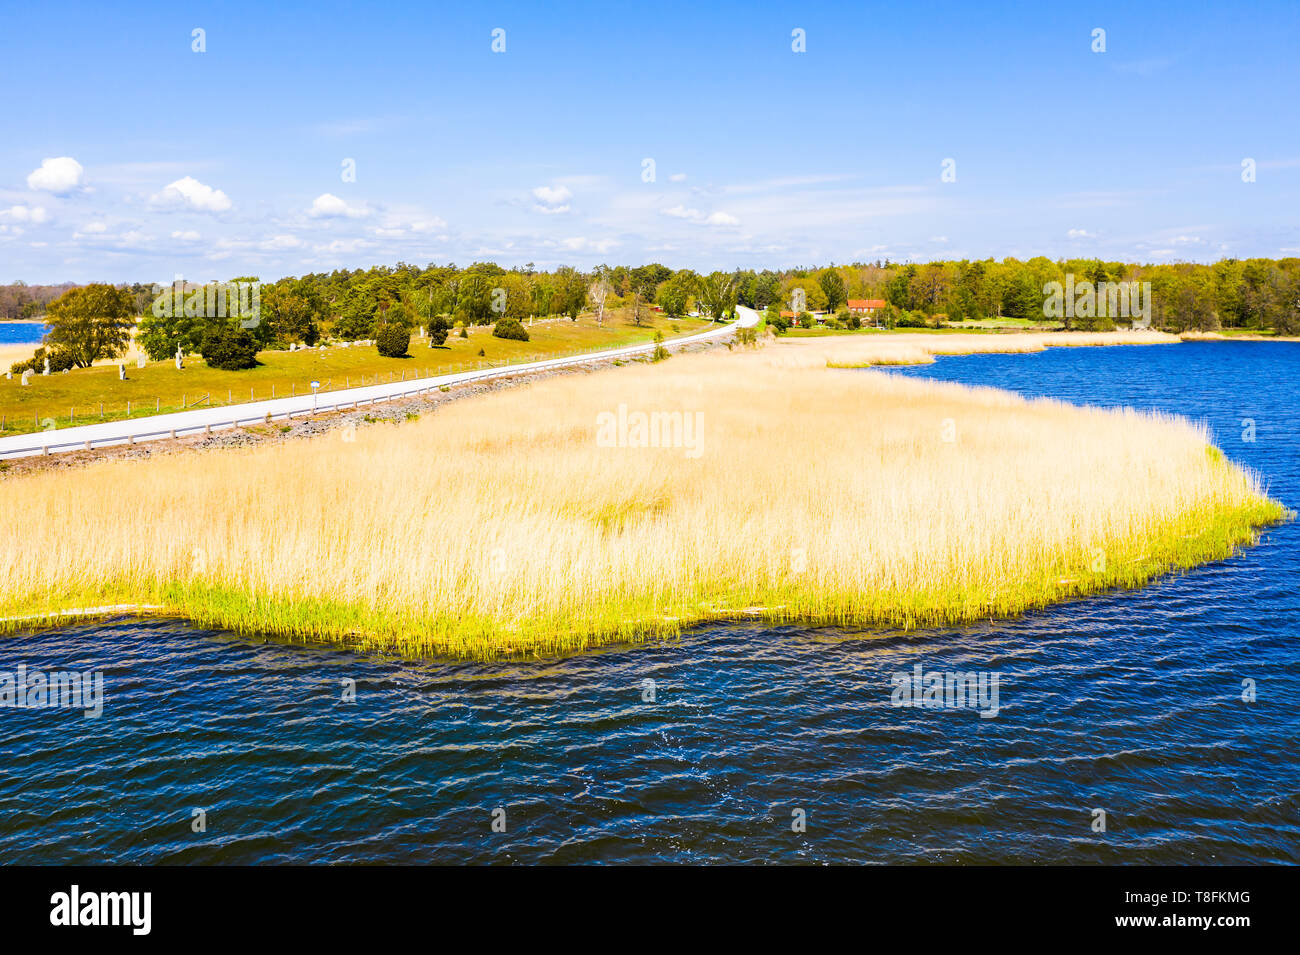 Yellow reed bed beside road in spring. Ancient grave field in the background. Hjortahammar in Blekinge, Sweden. Stock Photo